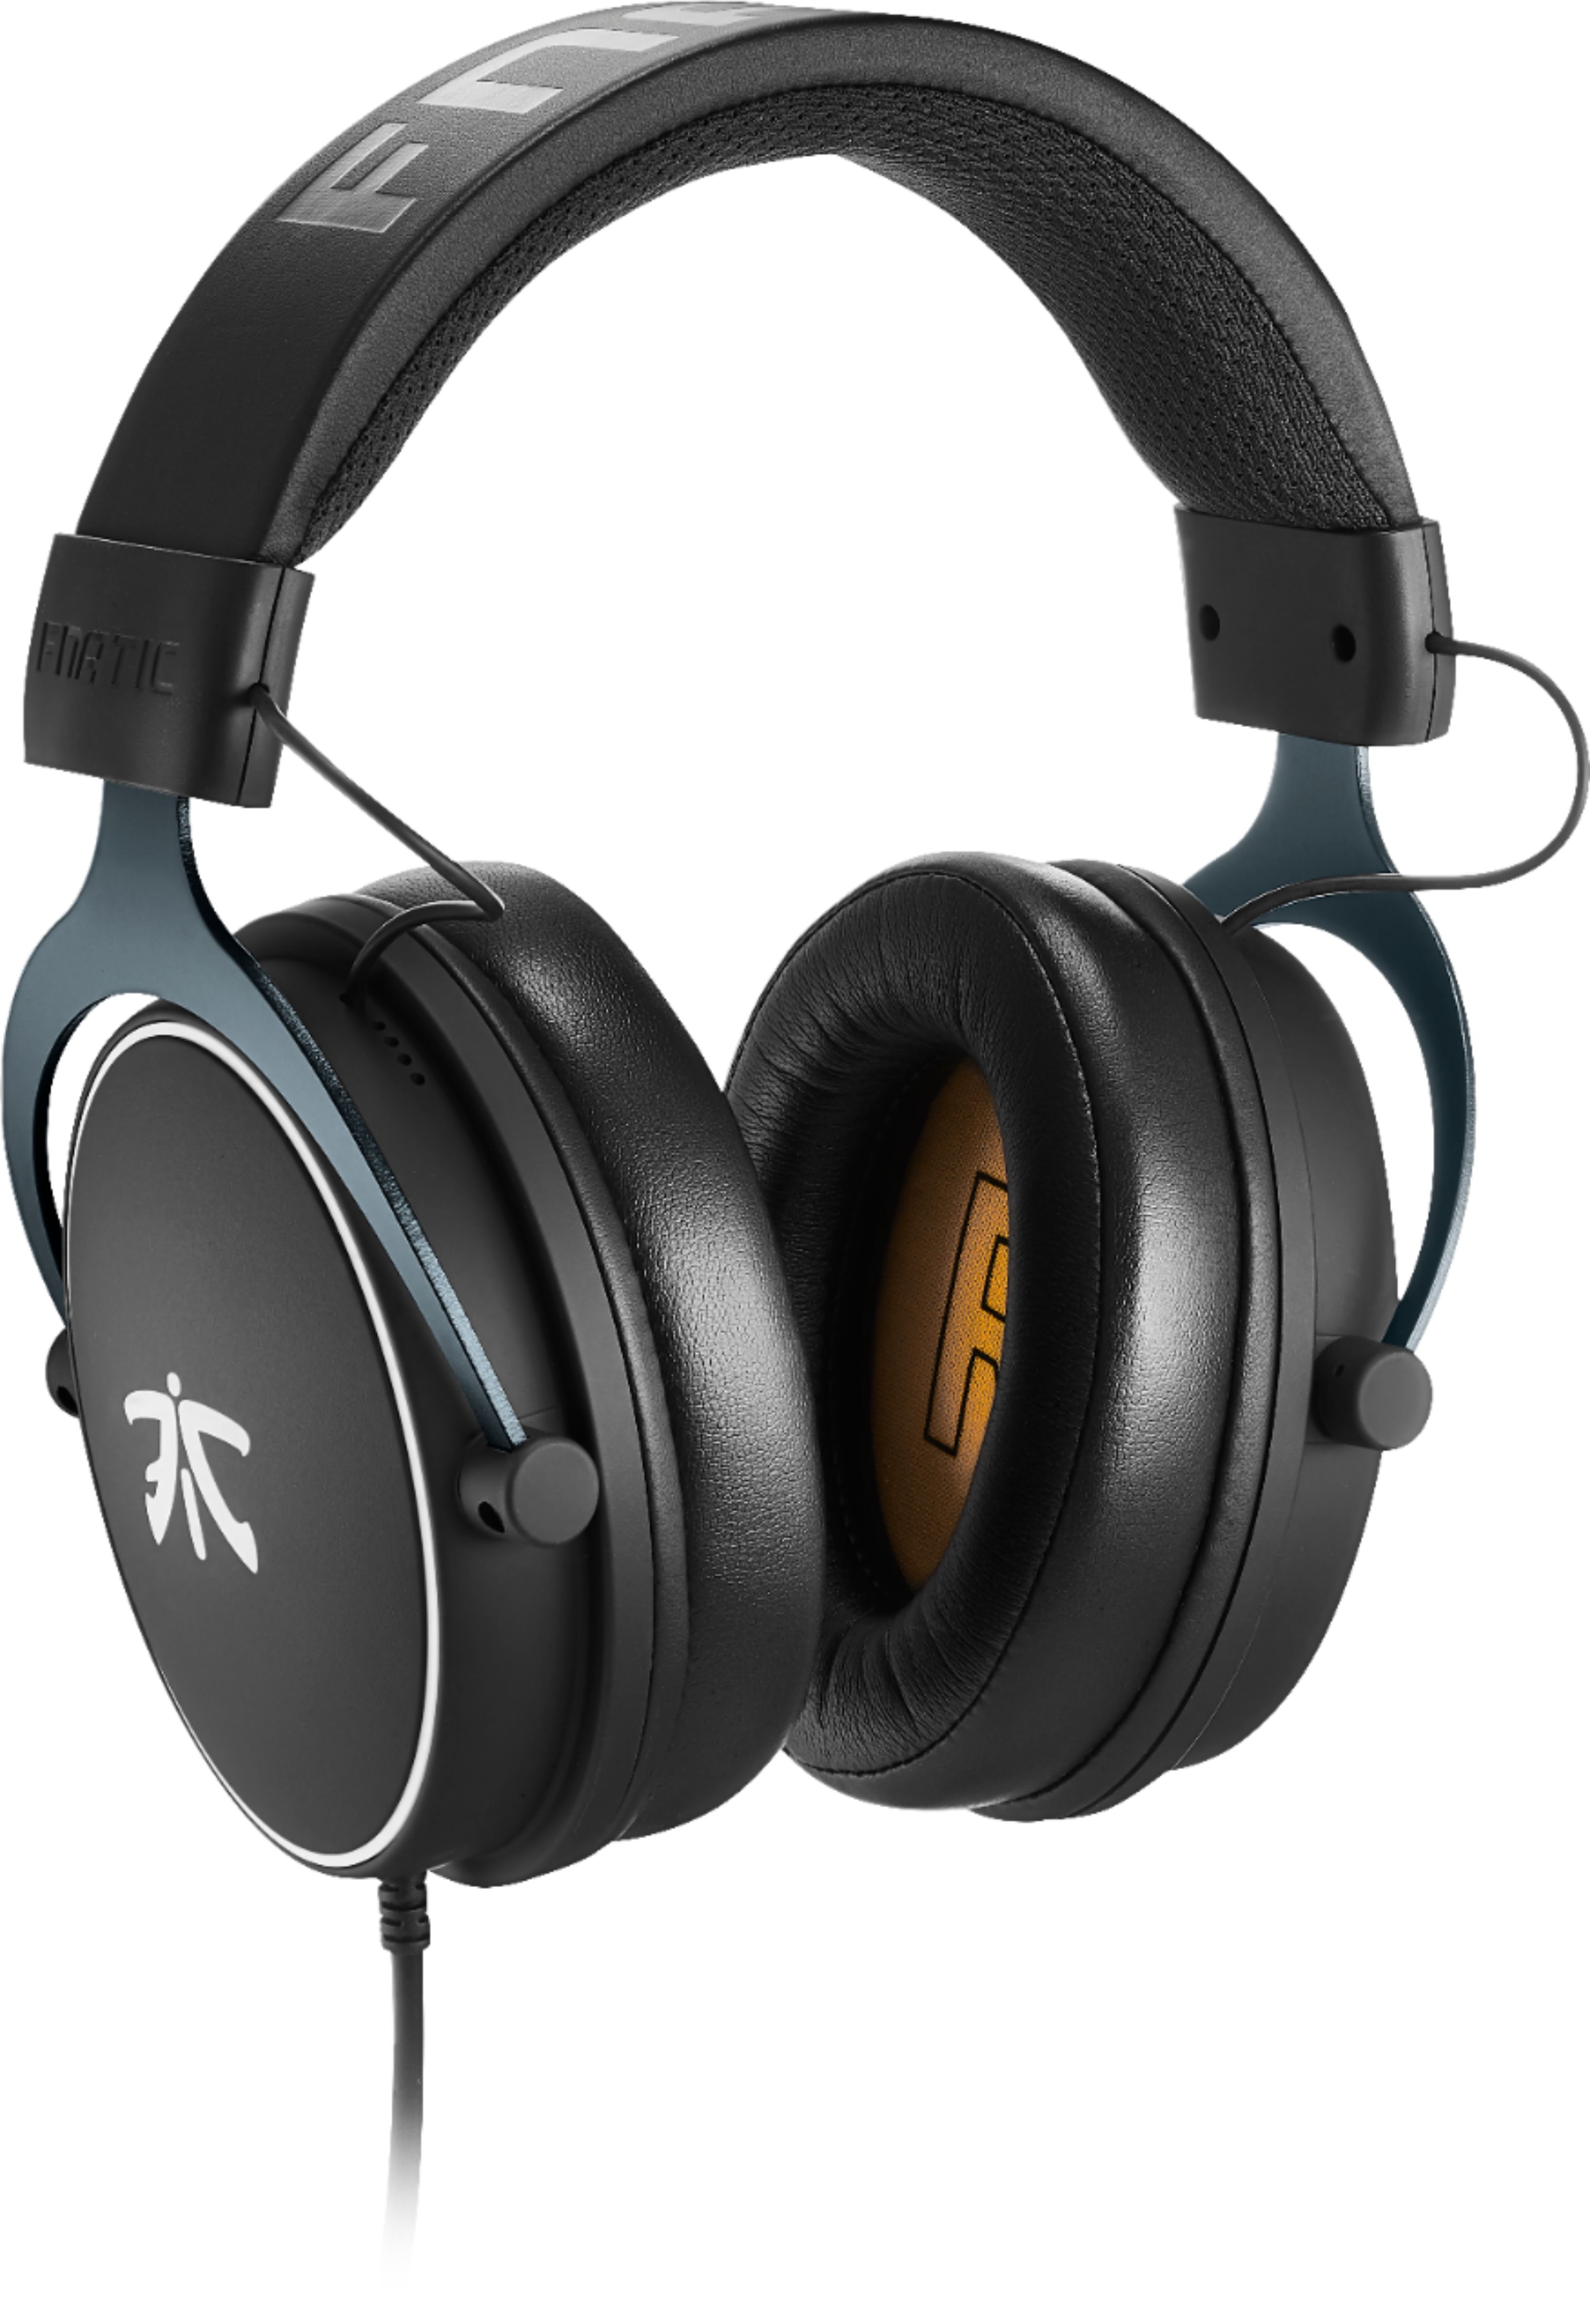 Fnatic REACT Wired Stereo Gaming Headset - Black